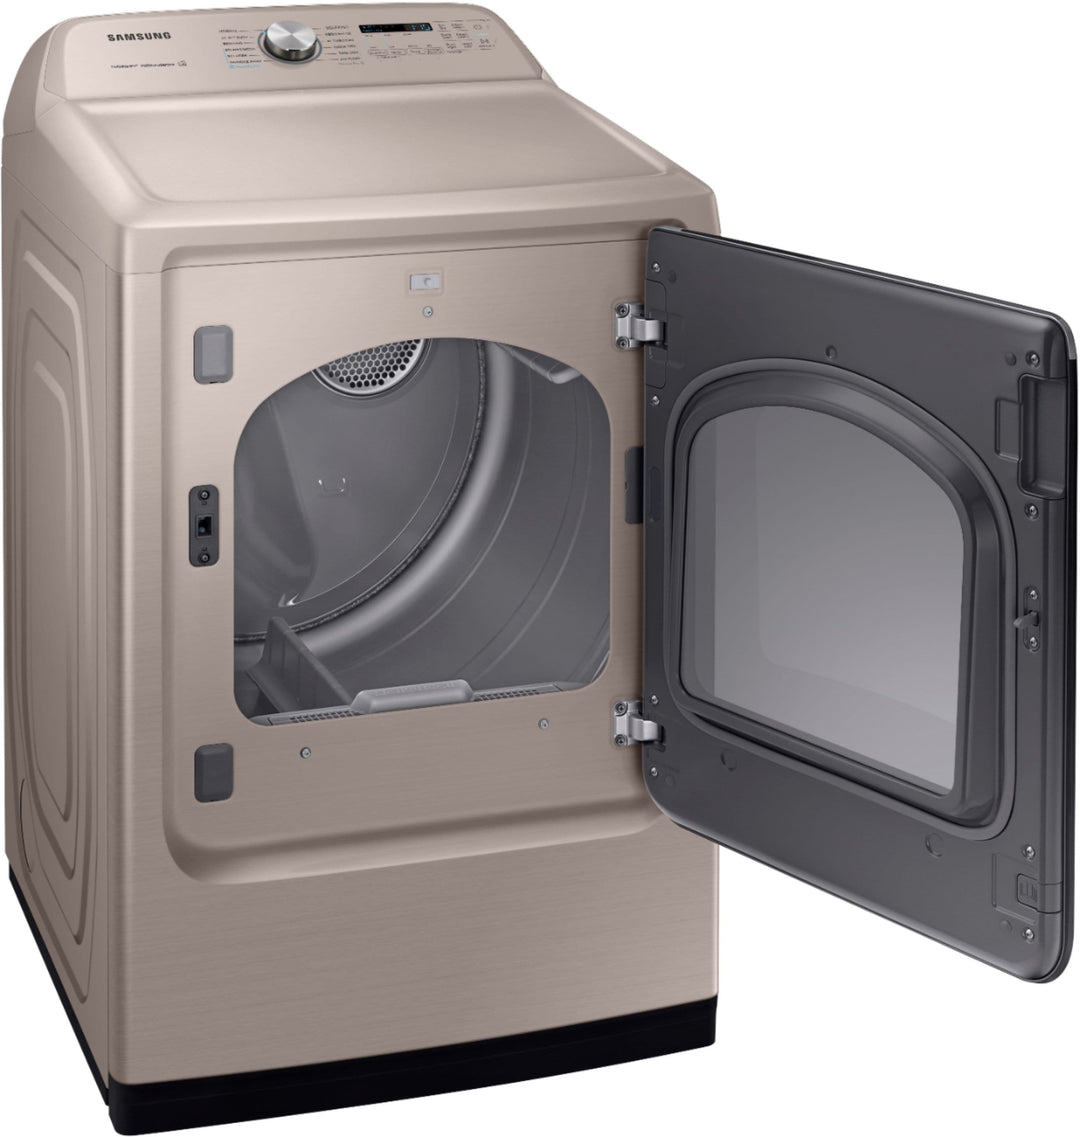 Samsung - 7.4 Cu. Ft. Electric Dryer with Steam and Sensor Dry - Champagne_2